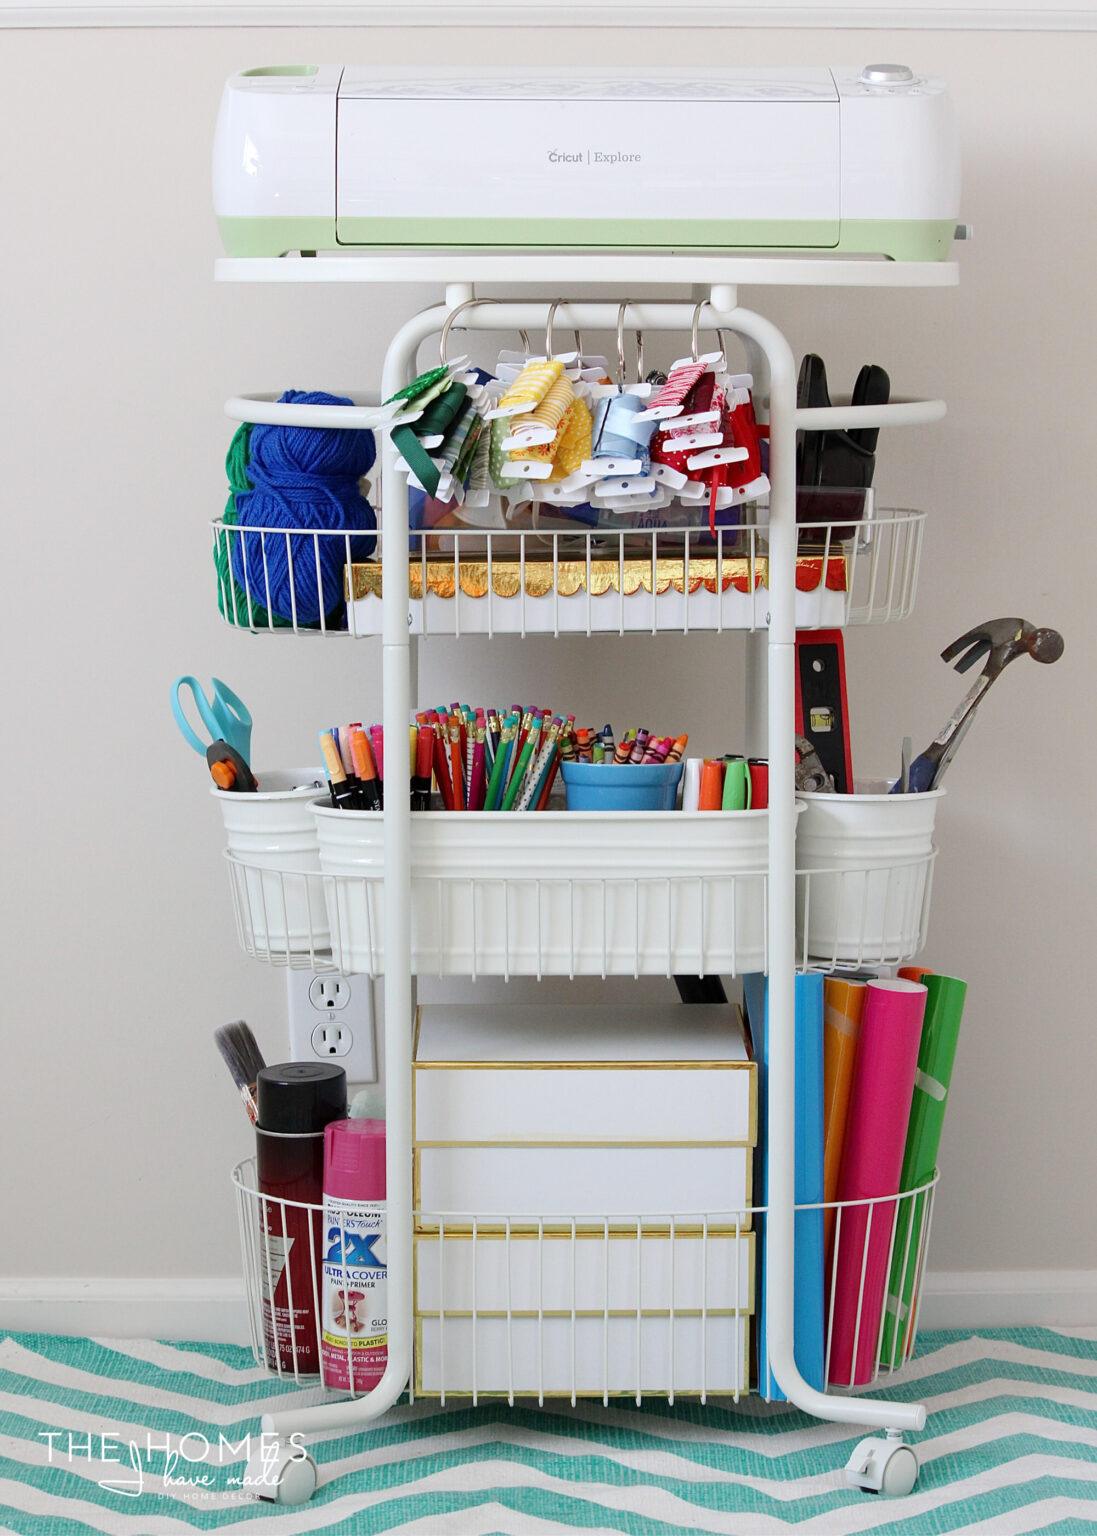 Smart Cricut Storage Ideas for Every & Any Craft Space - The Homes I ...